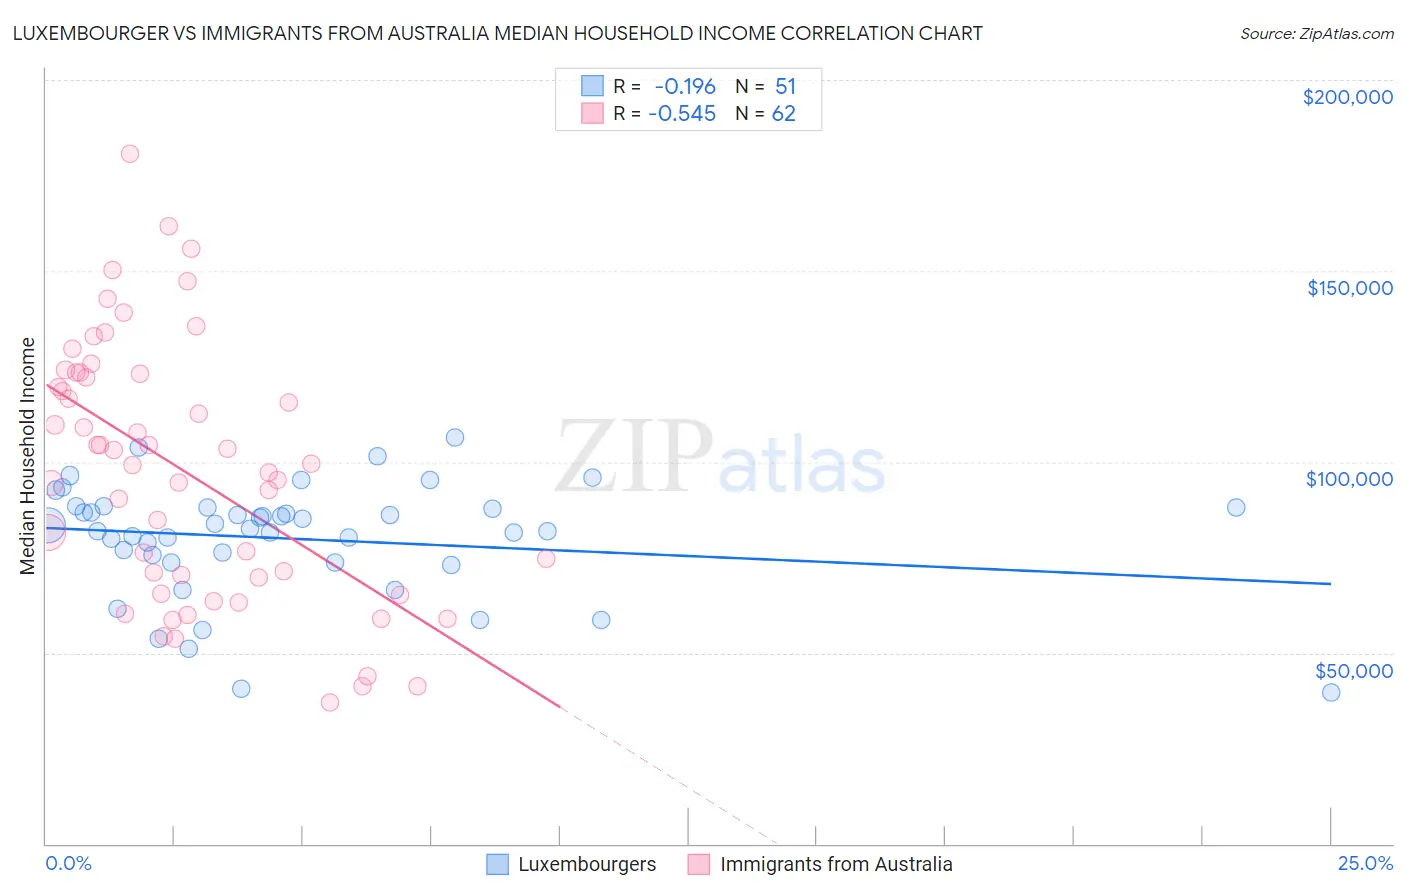 Luxembourger vs Immigrants from Australia Median Household Income